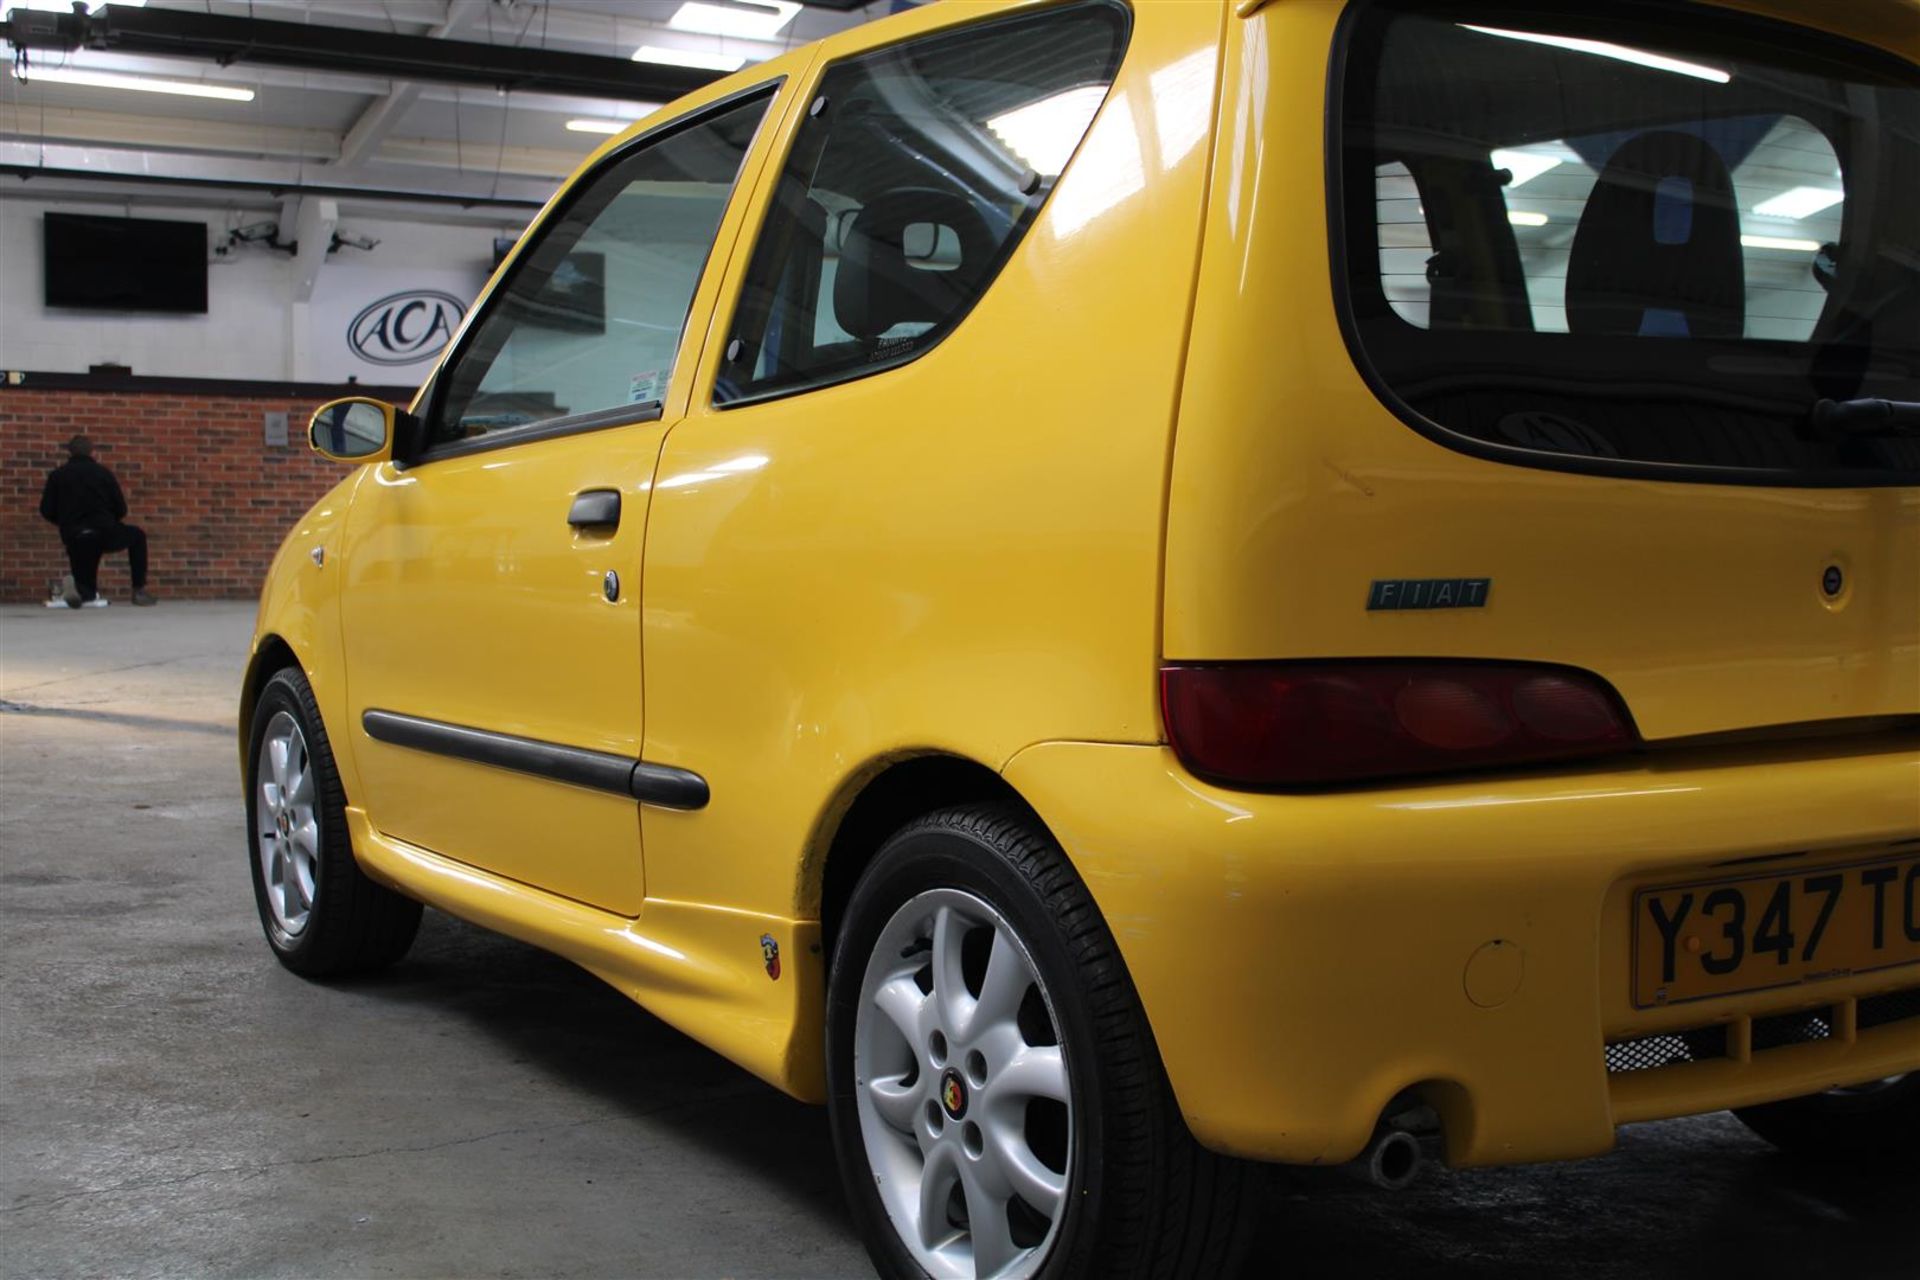 2001 Fiat Seicento Sporting - Image 10 of 20